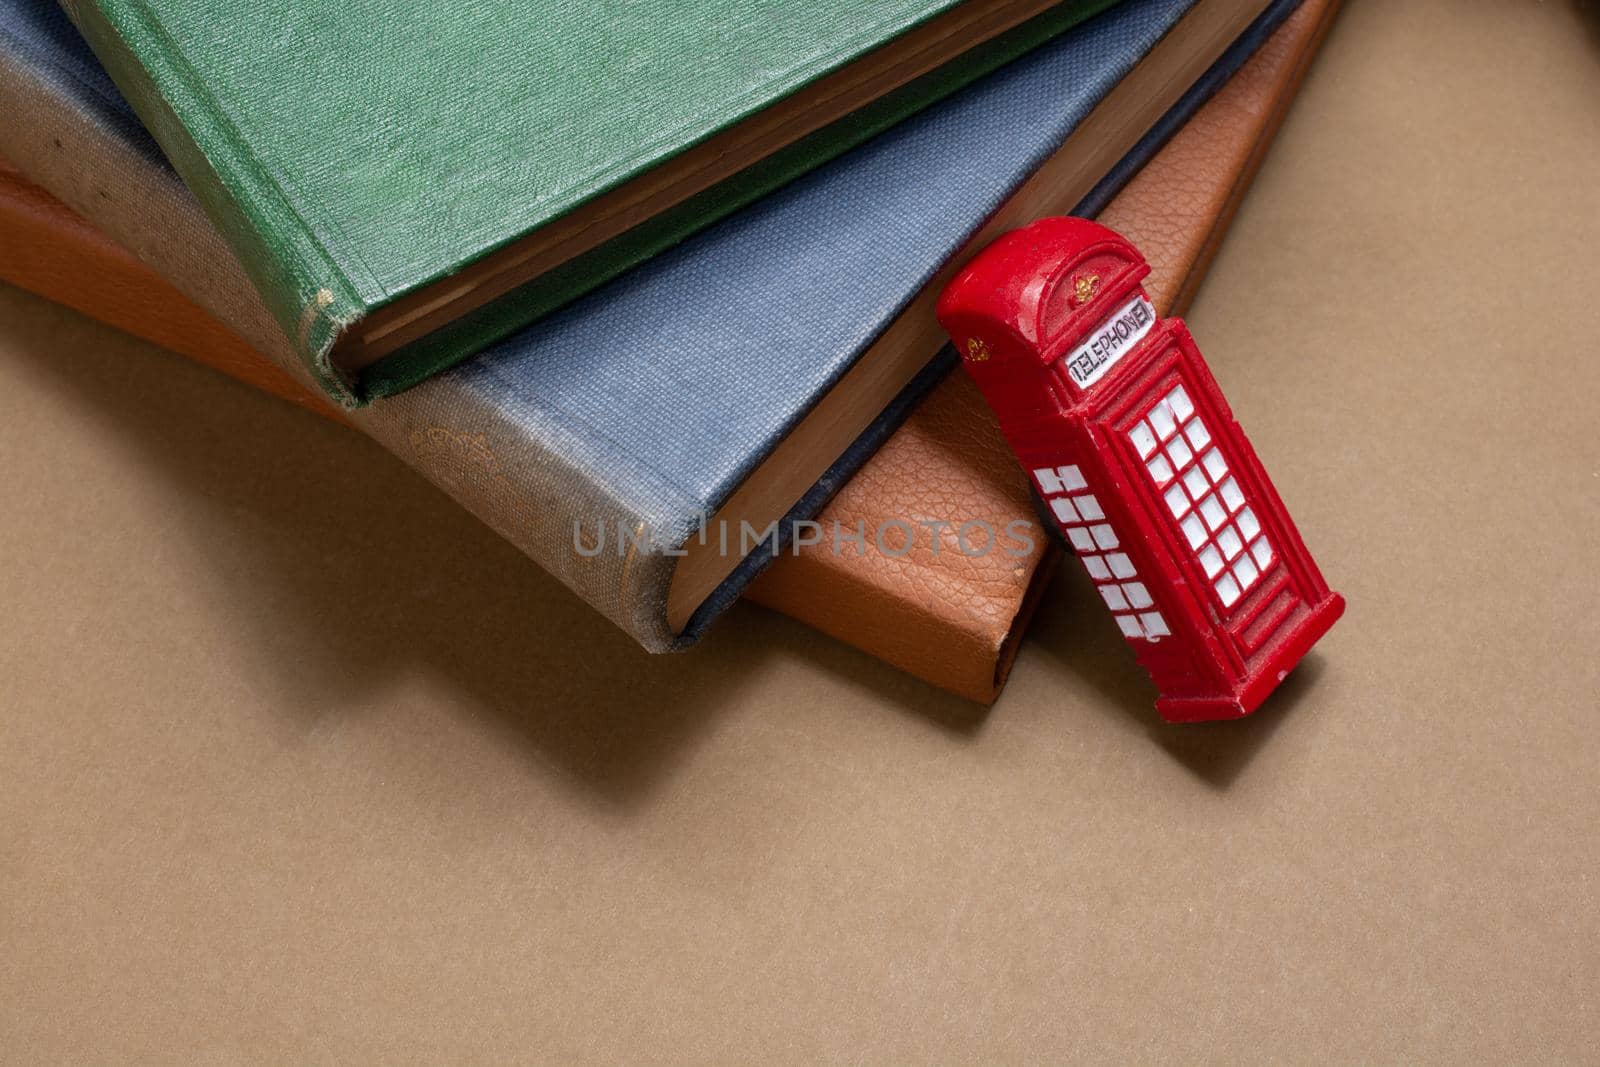 Classical British style Red phone booth beside books by berkay